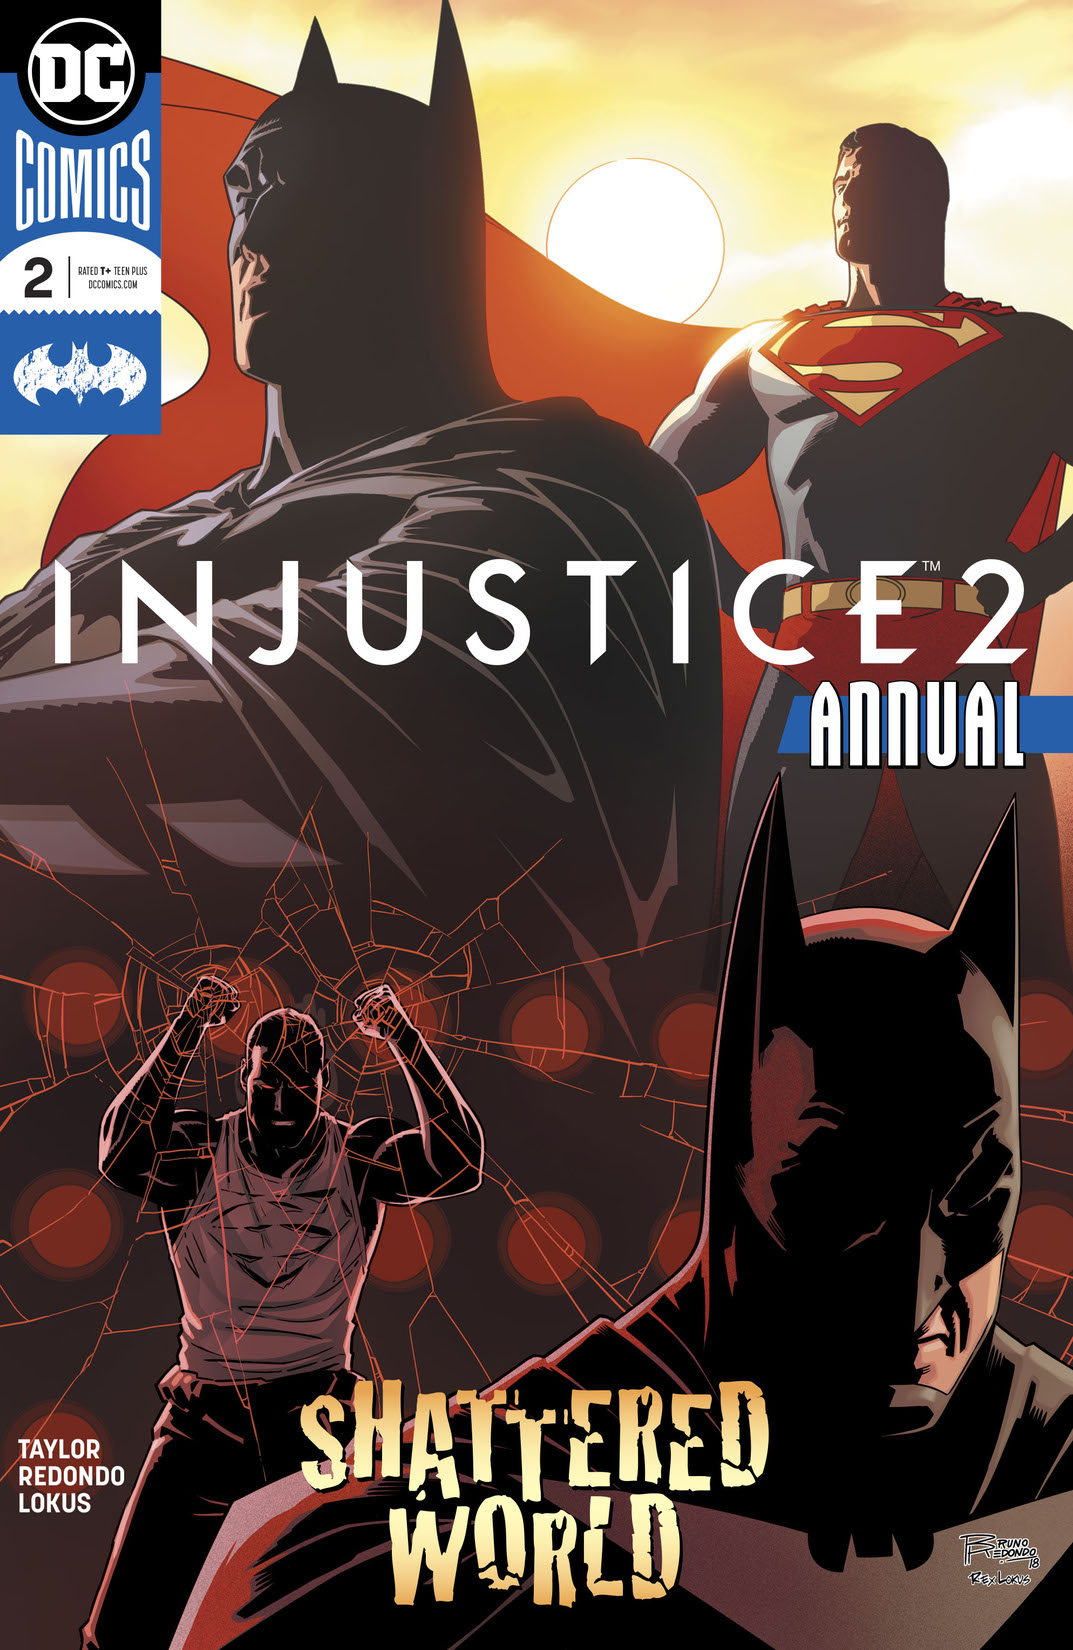 Injustice 2 Annual #2 preview images